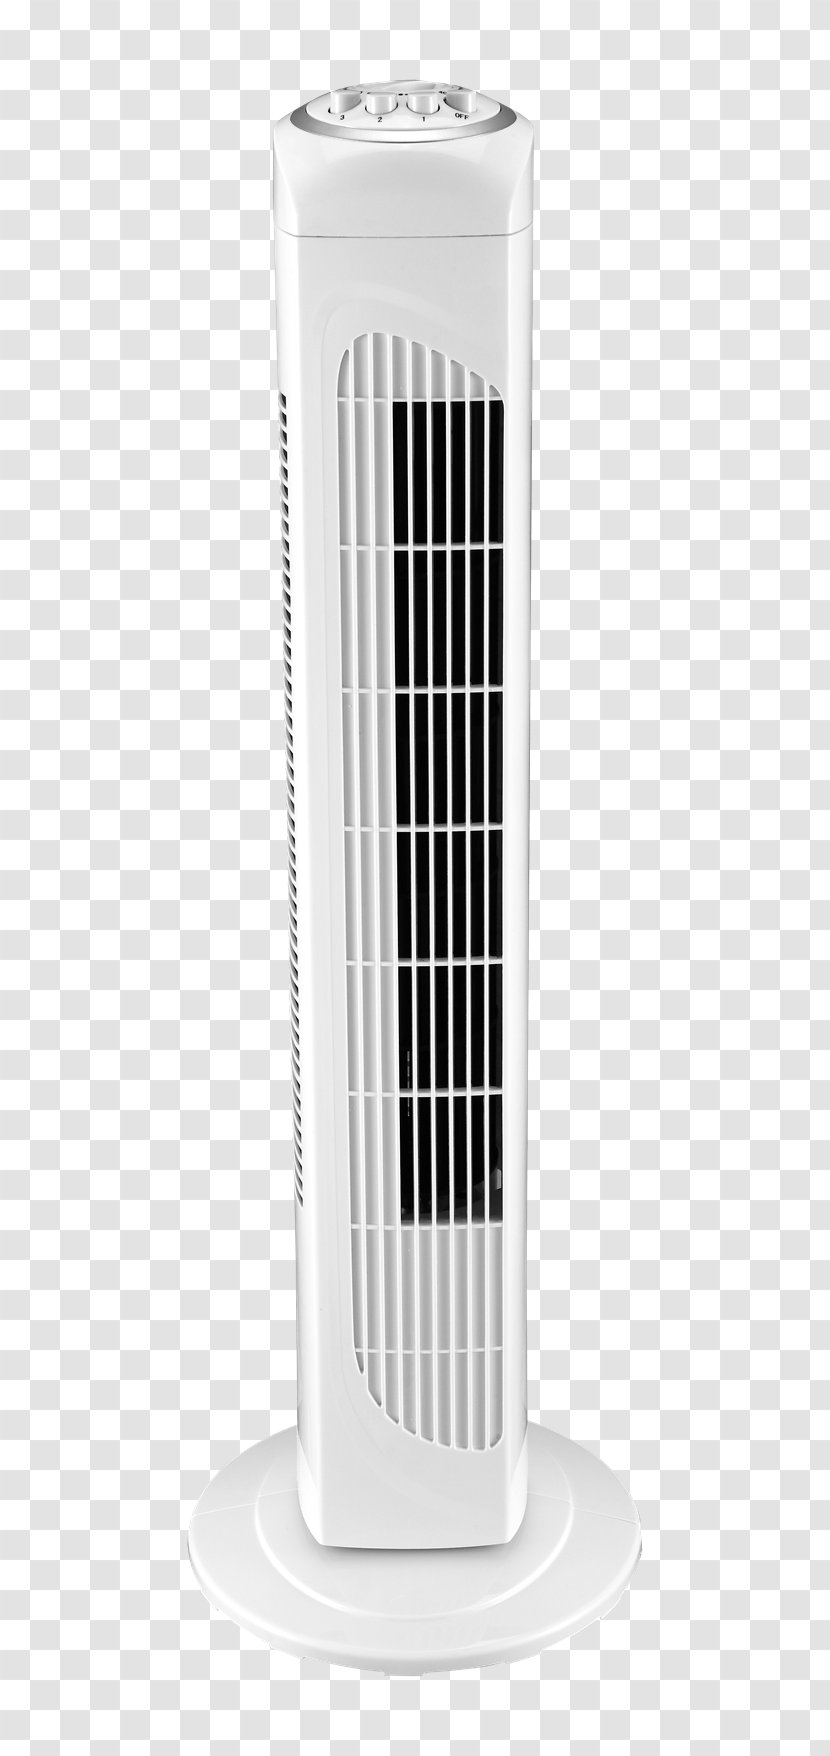 White Culture Velocity Co/Tech 36-6540-1 Home Appliance - Fan - Avesta Transparent PNG